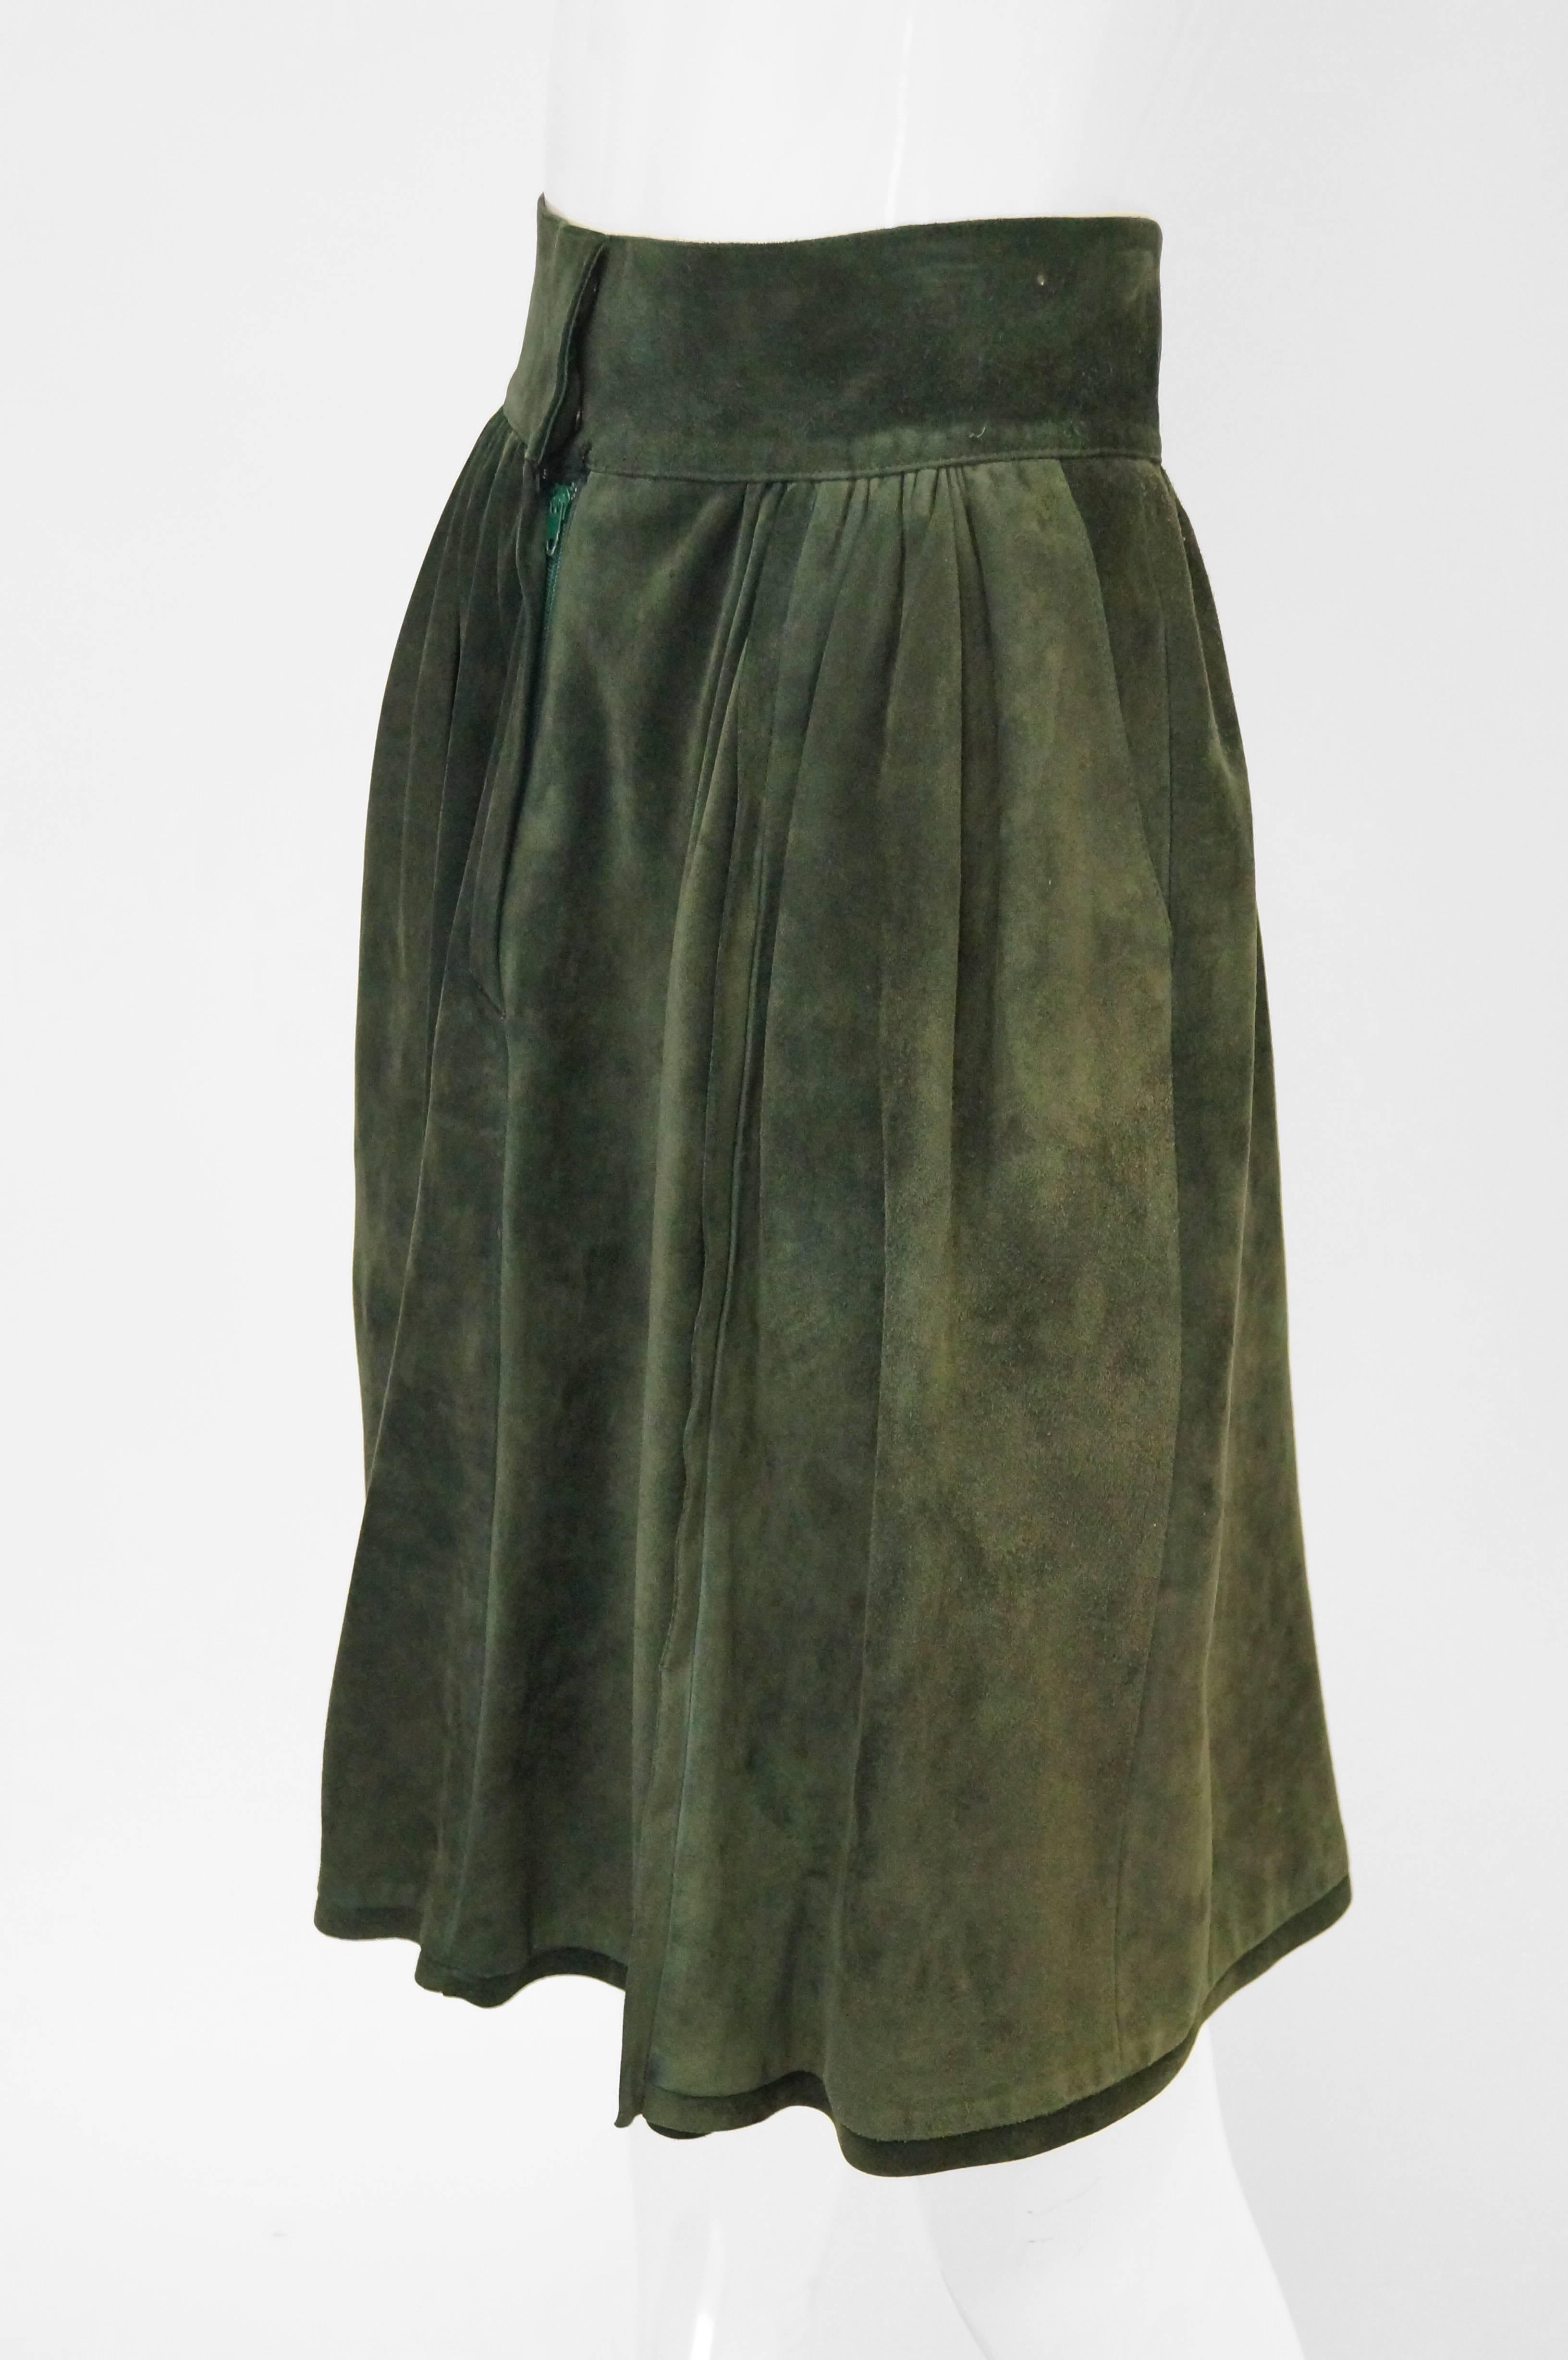 Green suede symmetrically pleated Mario Valentino skirt. Skirt is knee length, with a wide waist band, and zipper closure. Has pockets hidden in the pleats! Made in Italy.